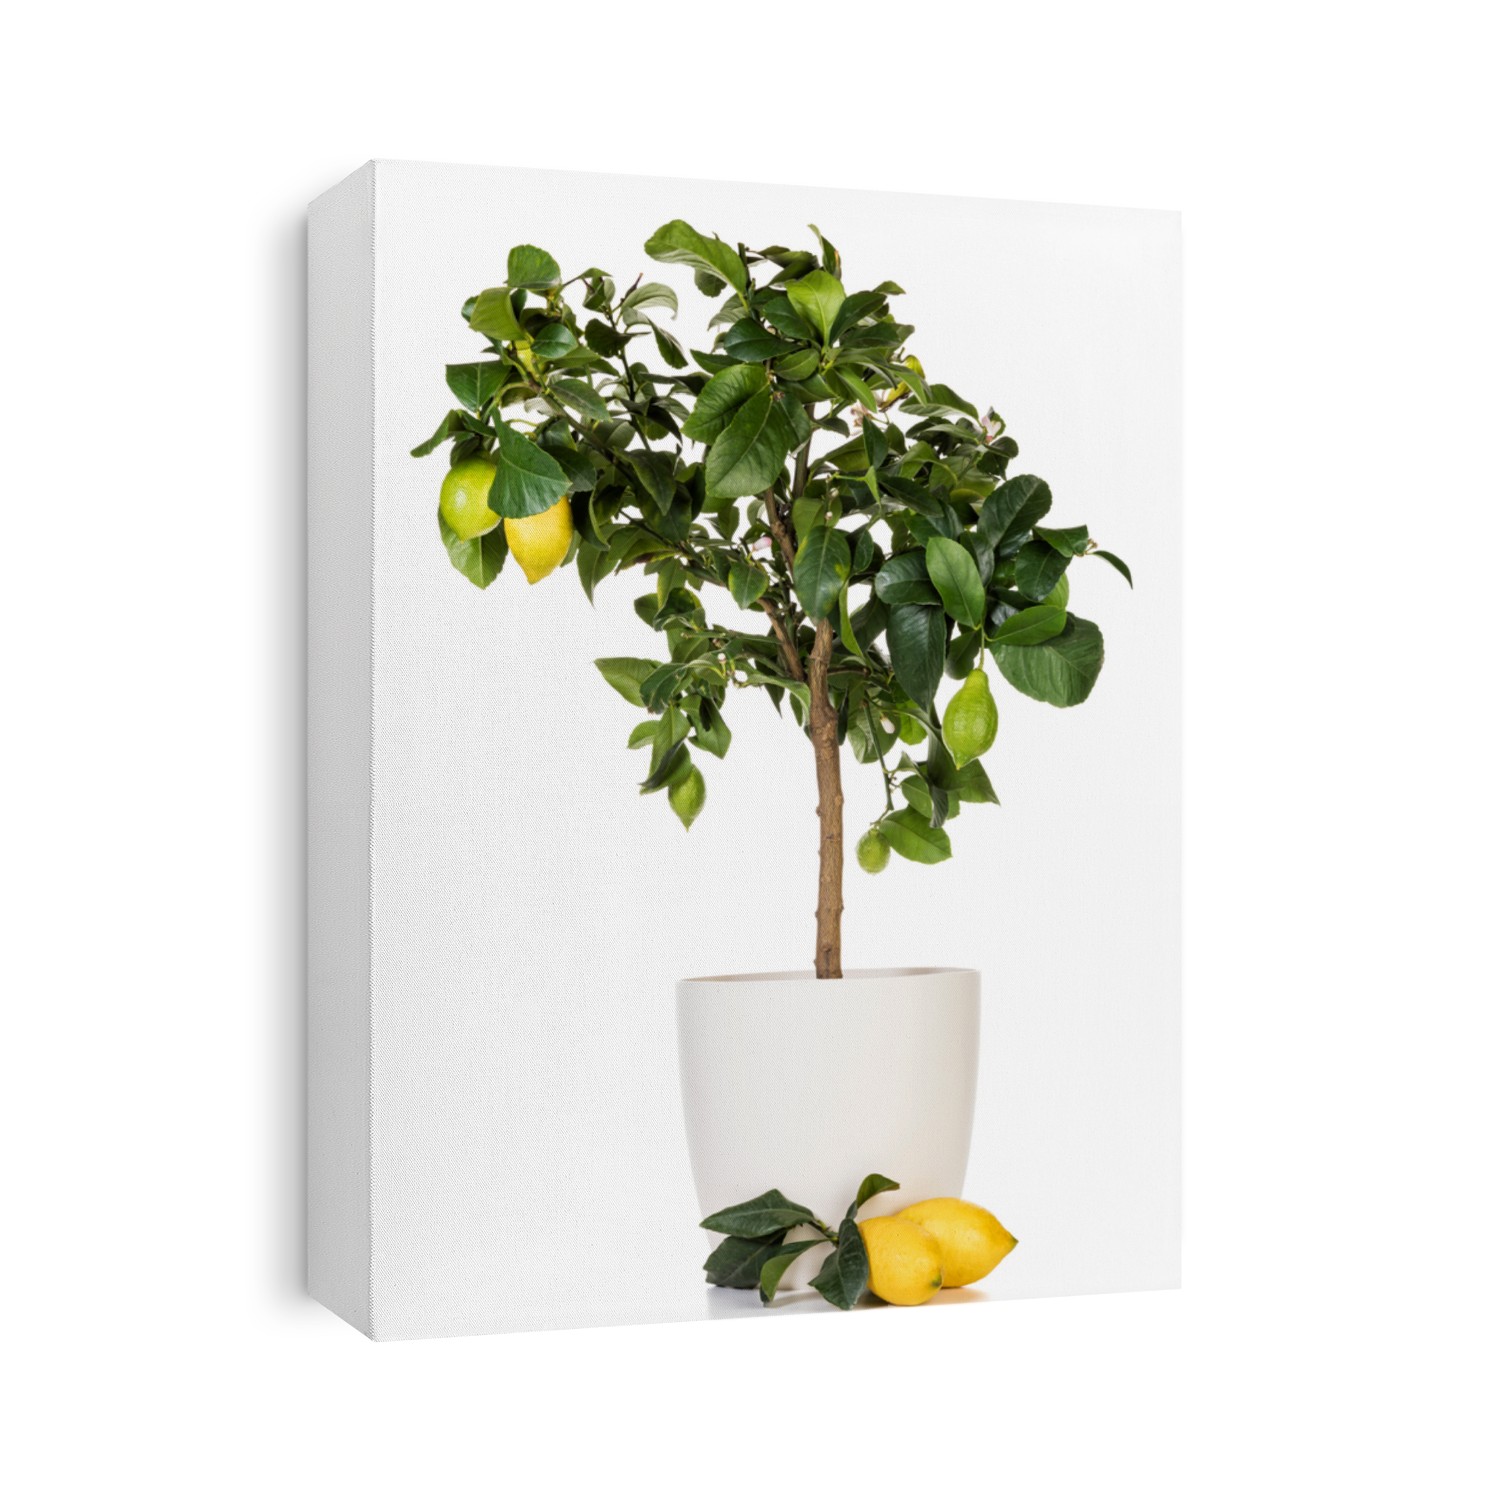 Potted lemon tree with several fruits isolated on white background